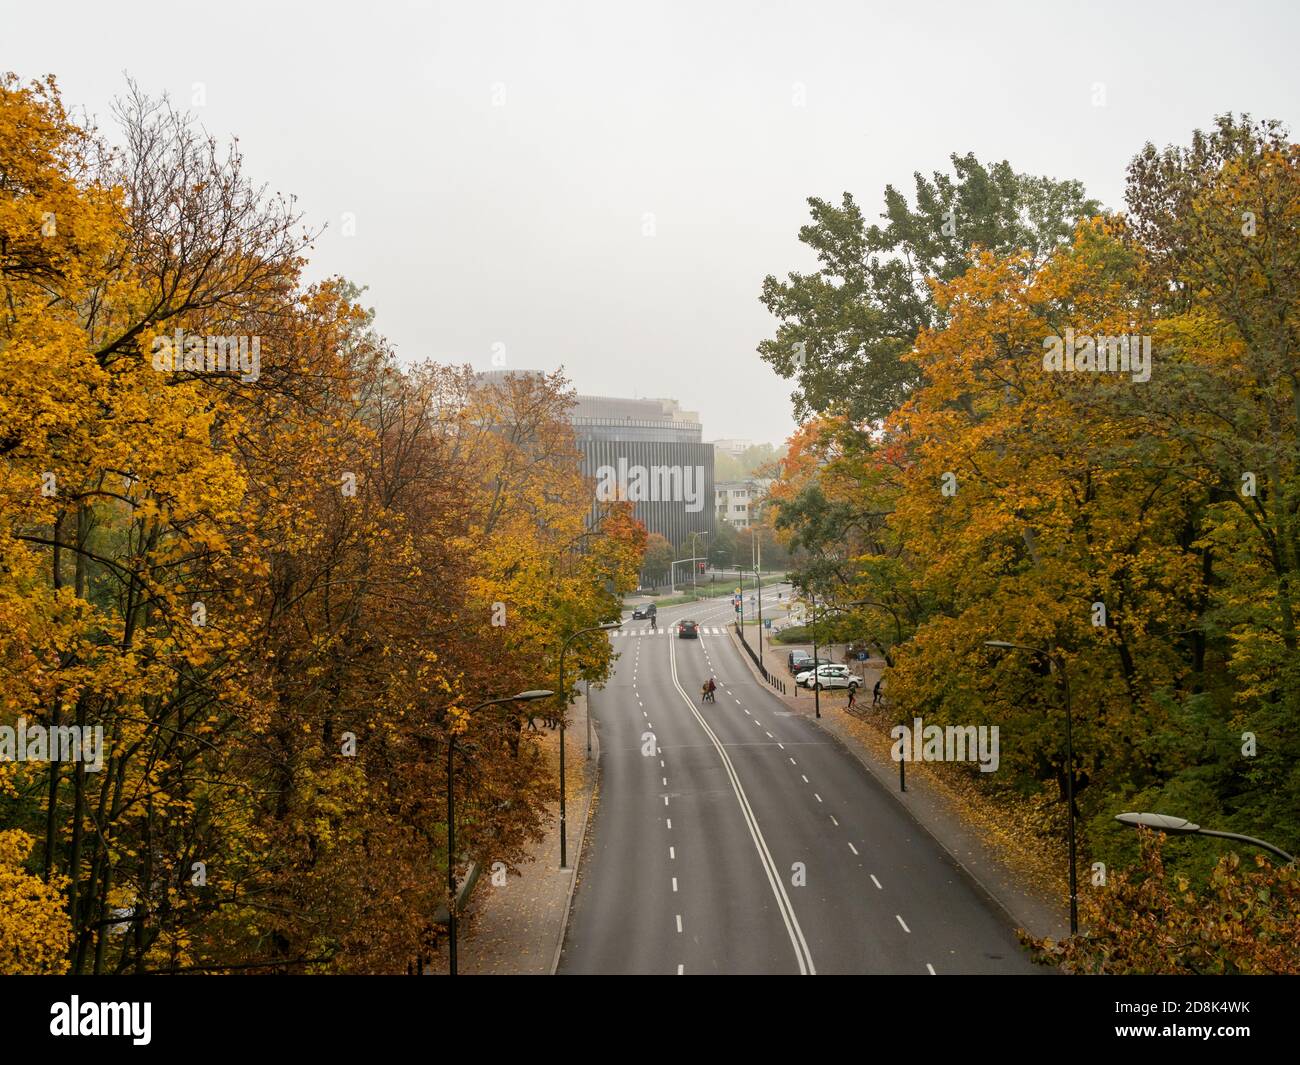 Warsaw/Poland - 25/10/2020 - almost empty street, few cars and people. Autumn time. Stock Photo